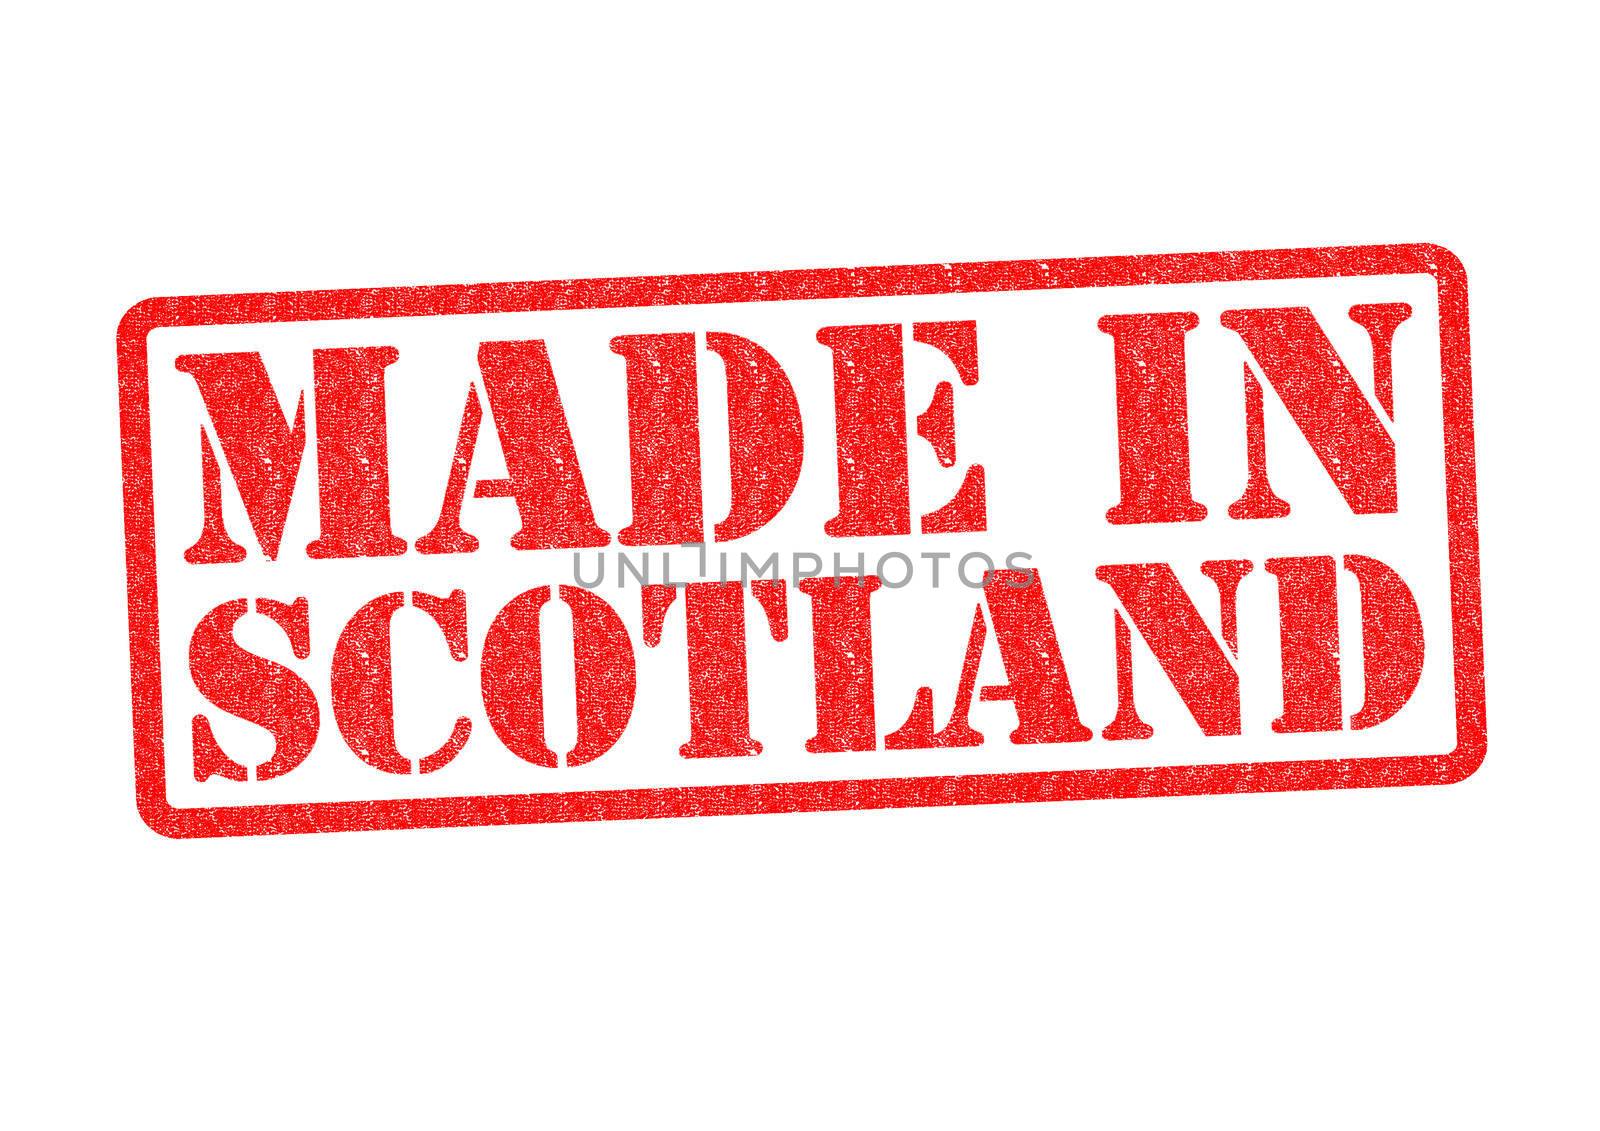 MADE IN SCOTLAND Rubber Stamp over a white background.